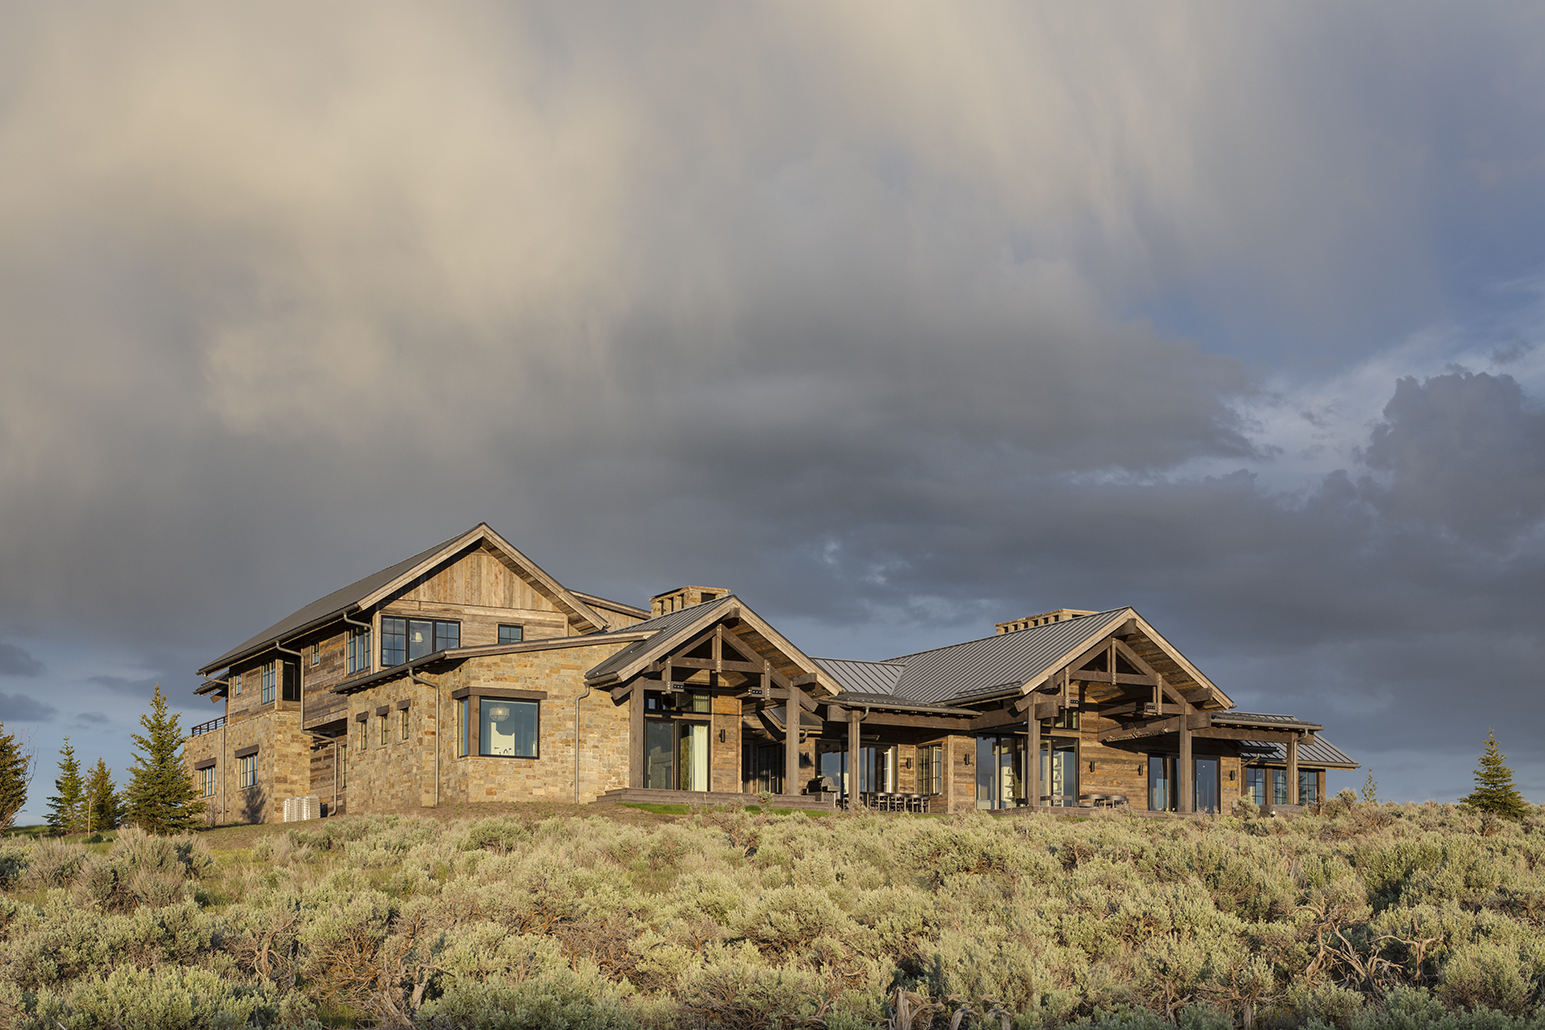 Exterior photograph of mountain rustic luxury residence at sunset near Park City, Utah. The photograph shows the main facade of recalimed timber, bathed in warm afternoon light, with dramatic and stormy skies behind the building. The home is surrounded by sage.